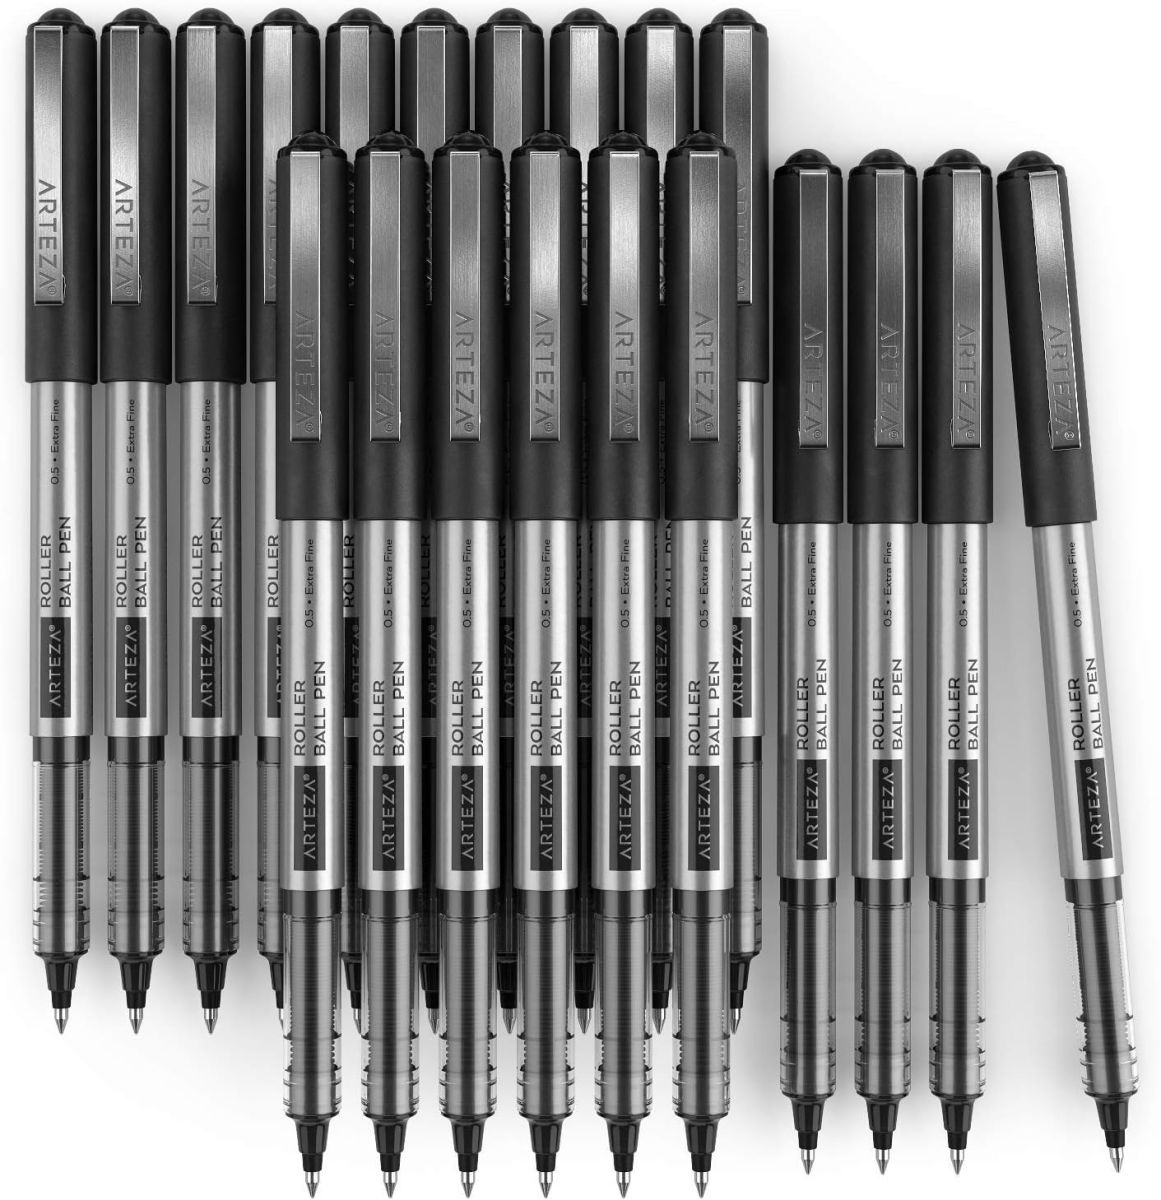 ARTEZA Rollerball Pens, Pack of 20, 0.5mm Black Liquid Ink Pens for Bullet Journaling, Fine Point Rollerball, Office Supplies for Writing, Taking Notes & Sketching